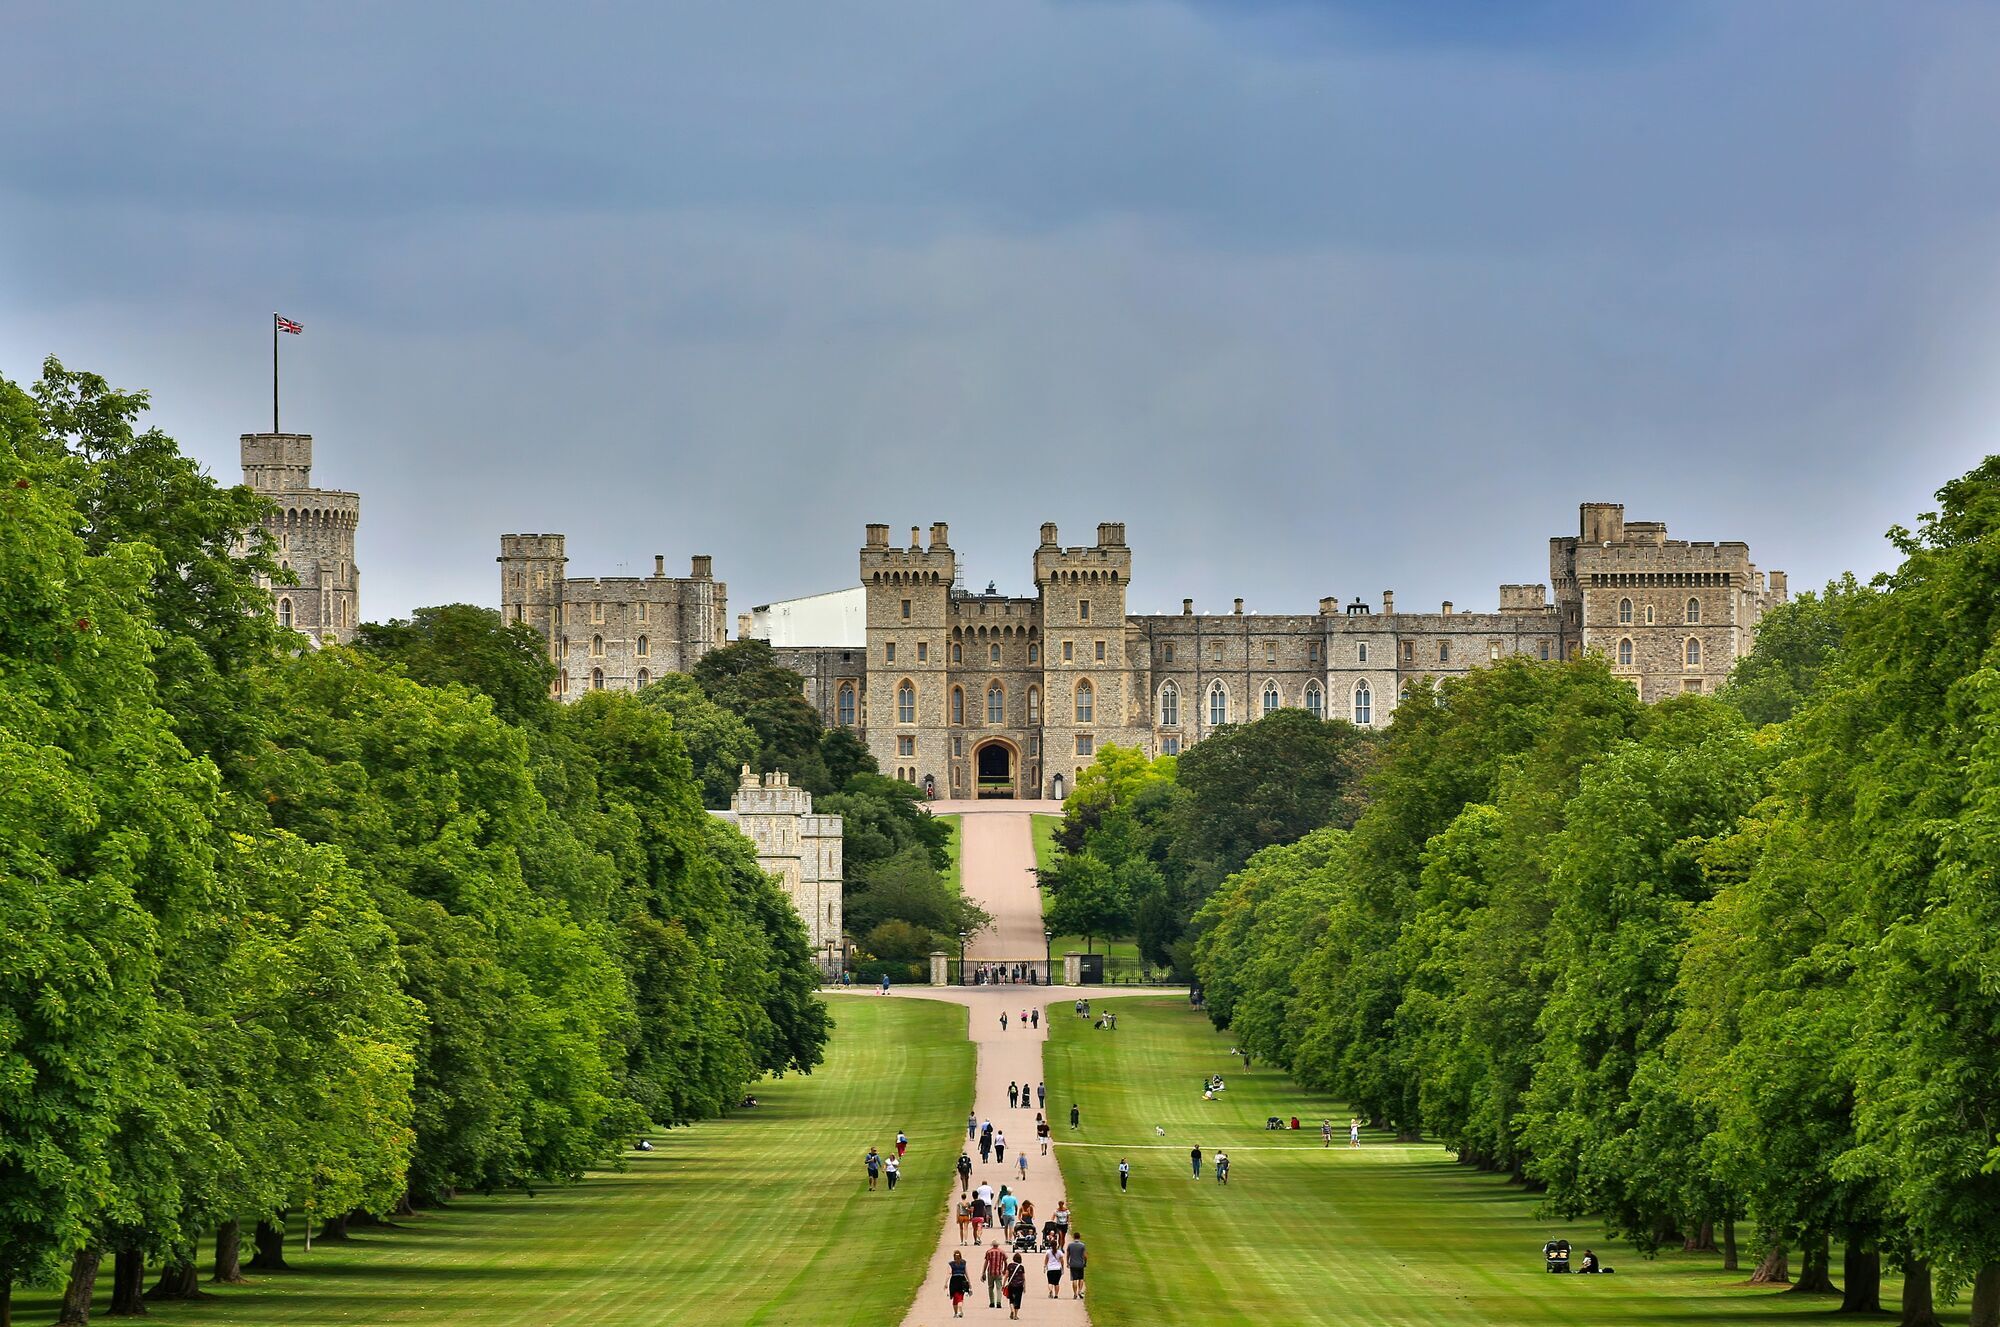 The most popular tourist attractions in the UK have become known